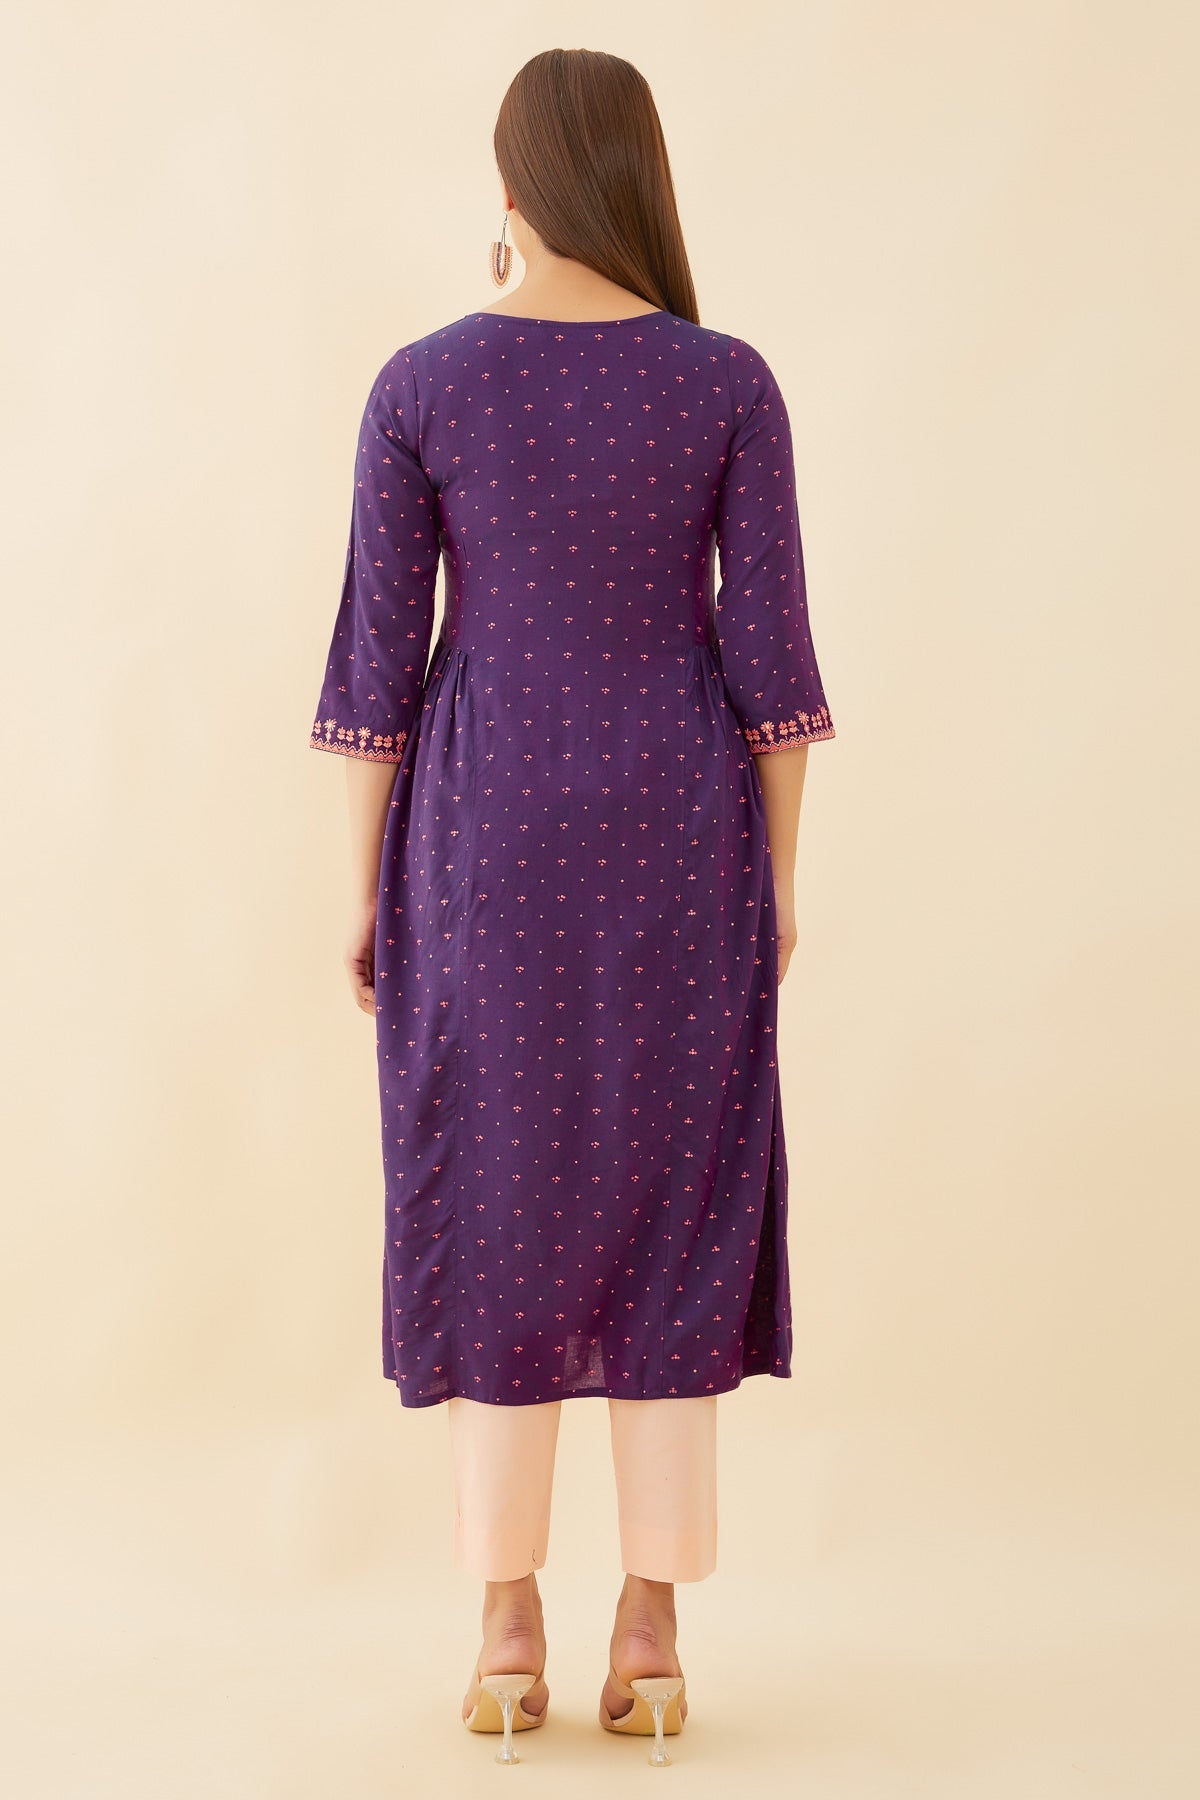 All Over Geometric Print With Foil Mirror Detail Embellished A Line Kurta Purple